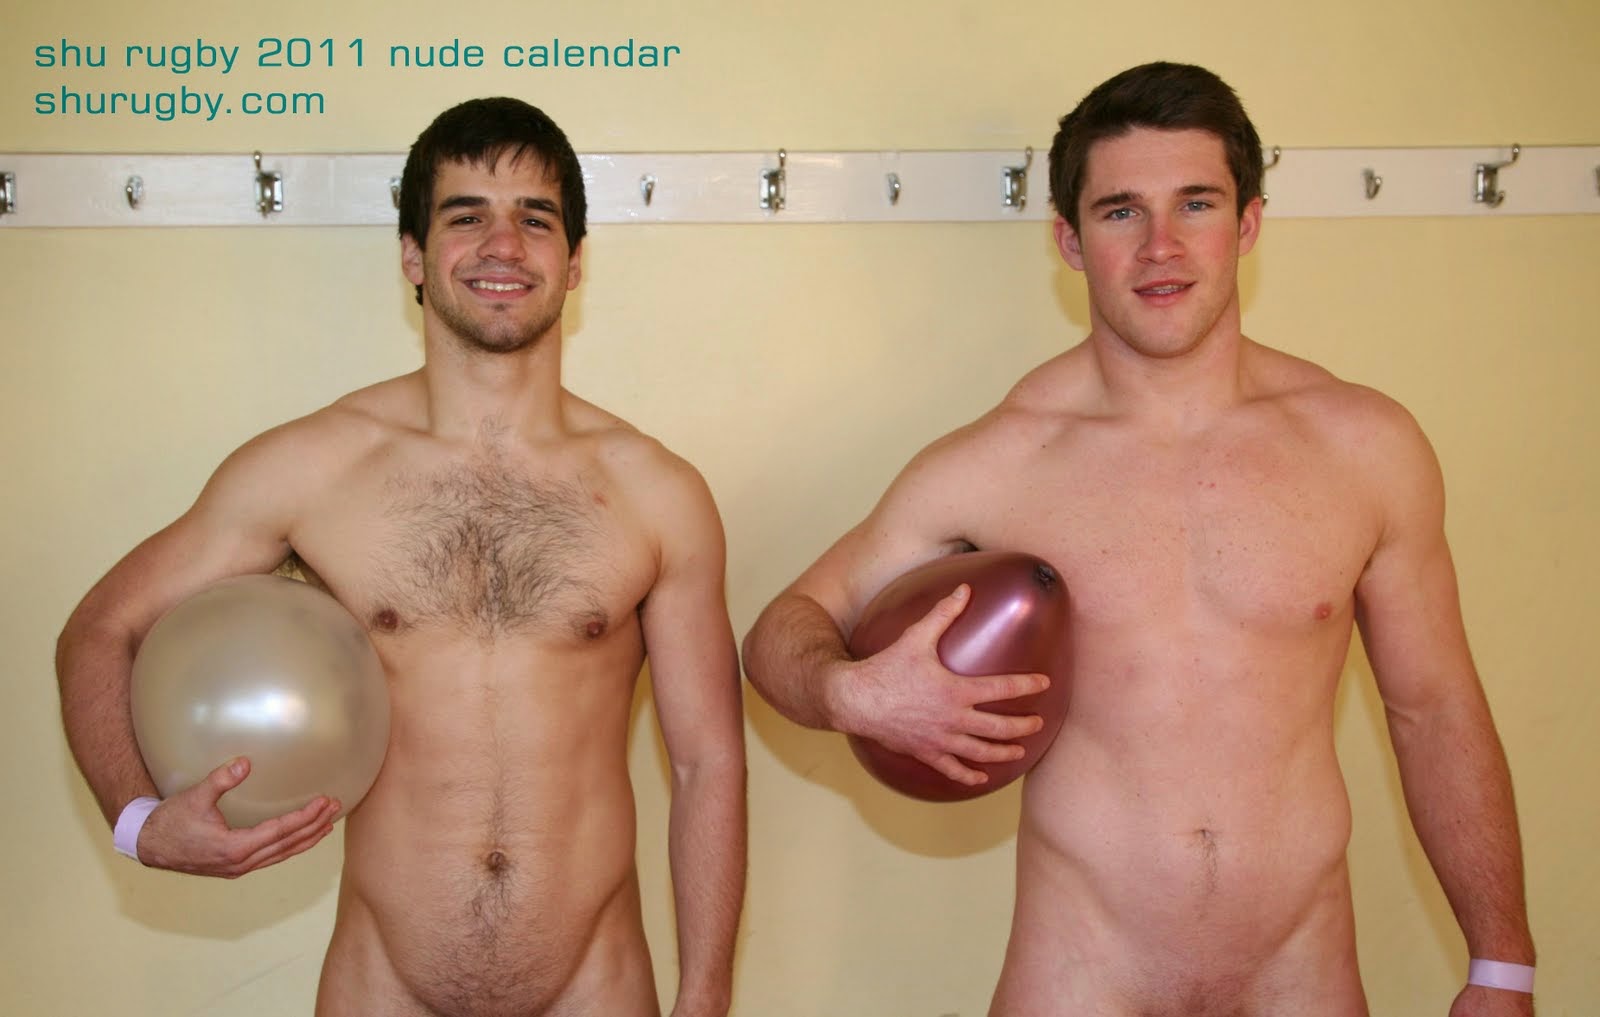 Shu rugby naked